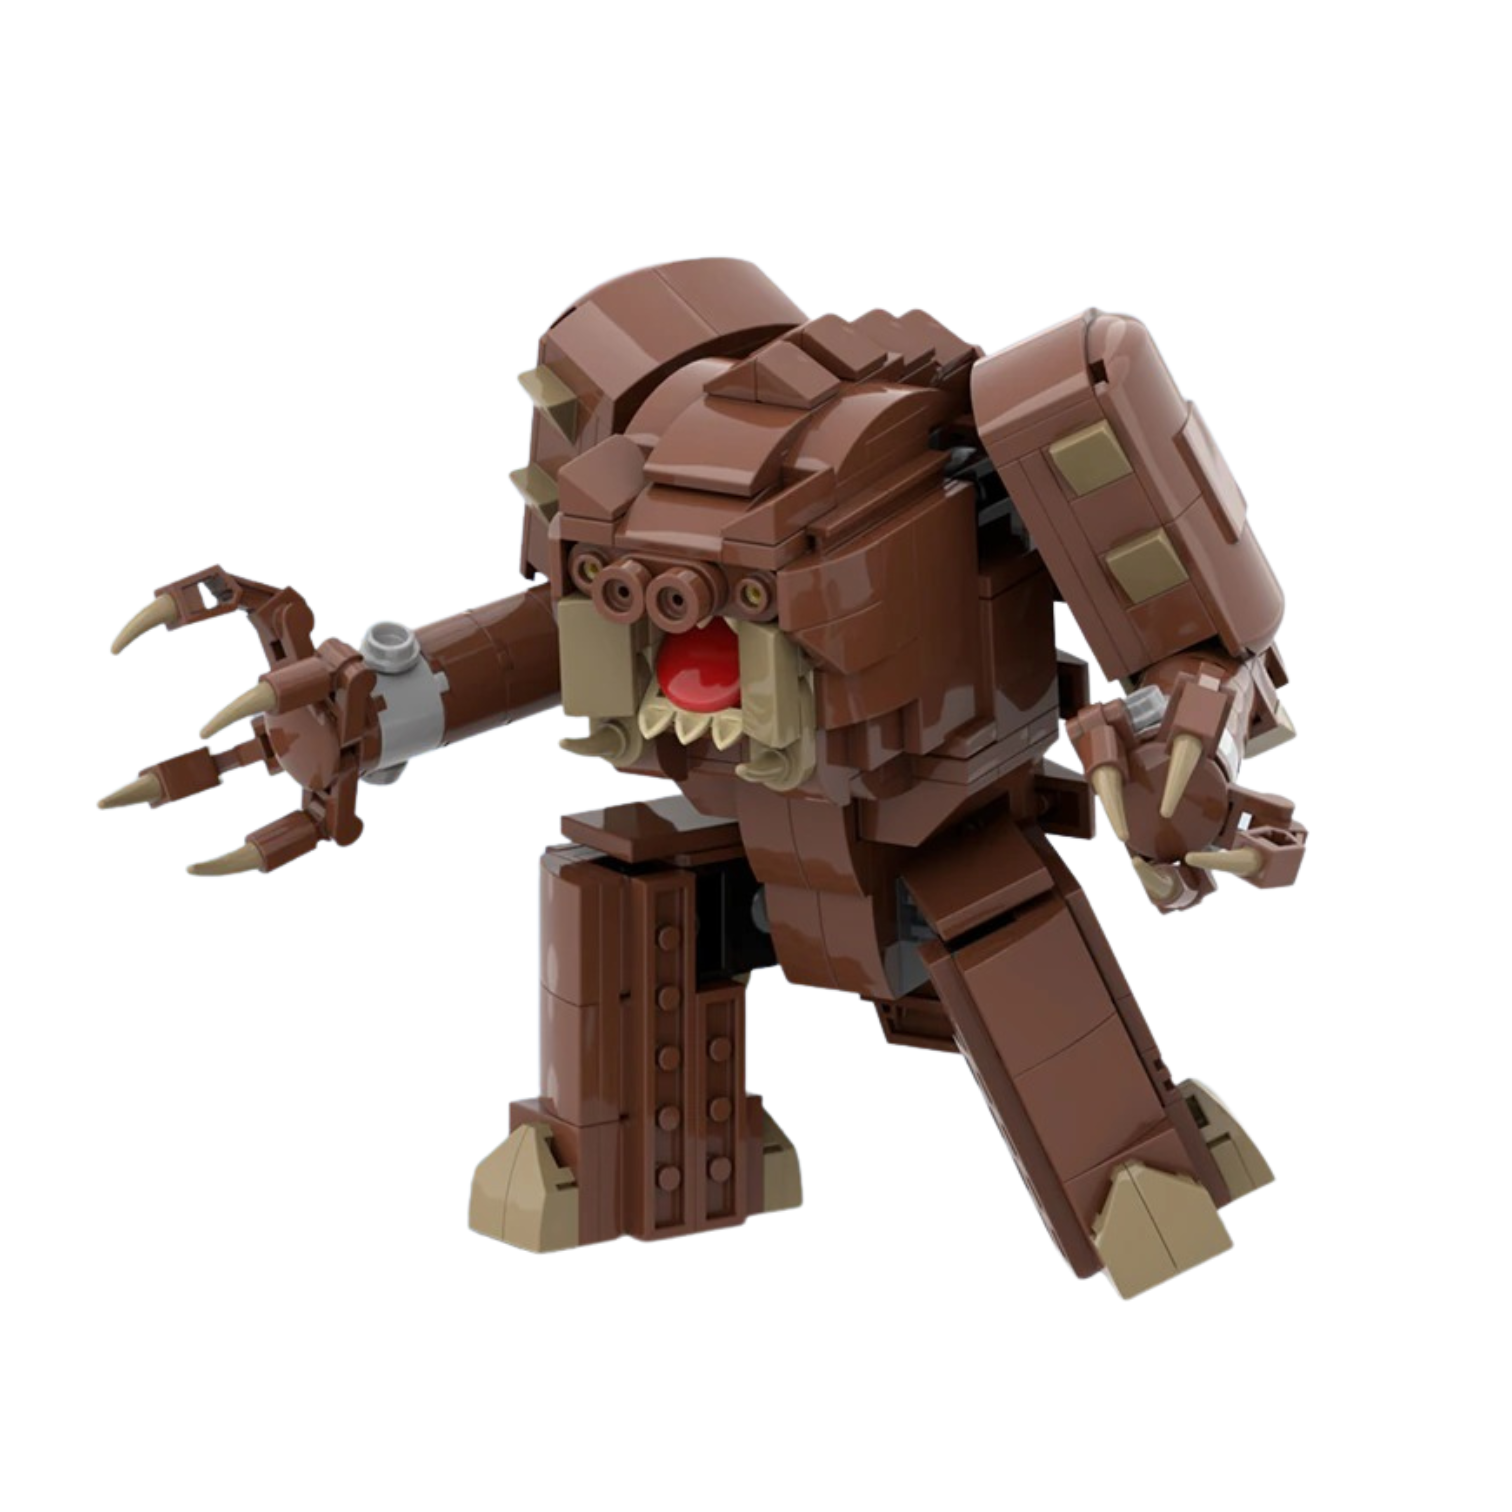 The Rancor MOC-107472 Star Wars With 370 Pieces